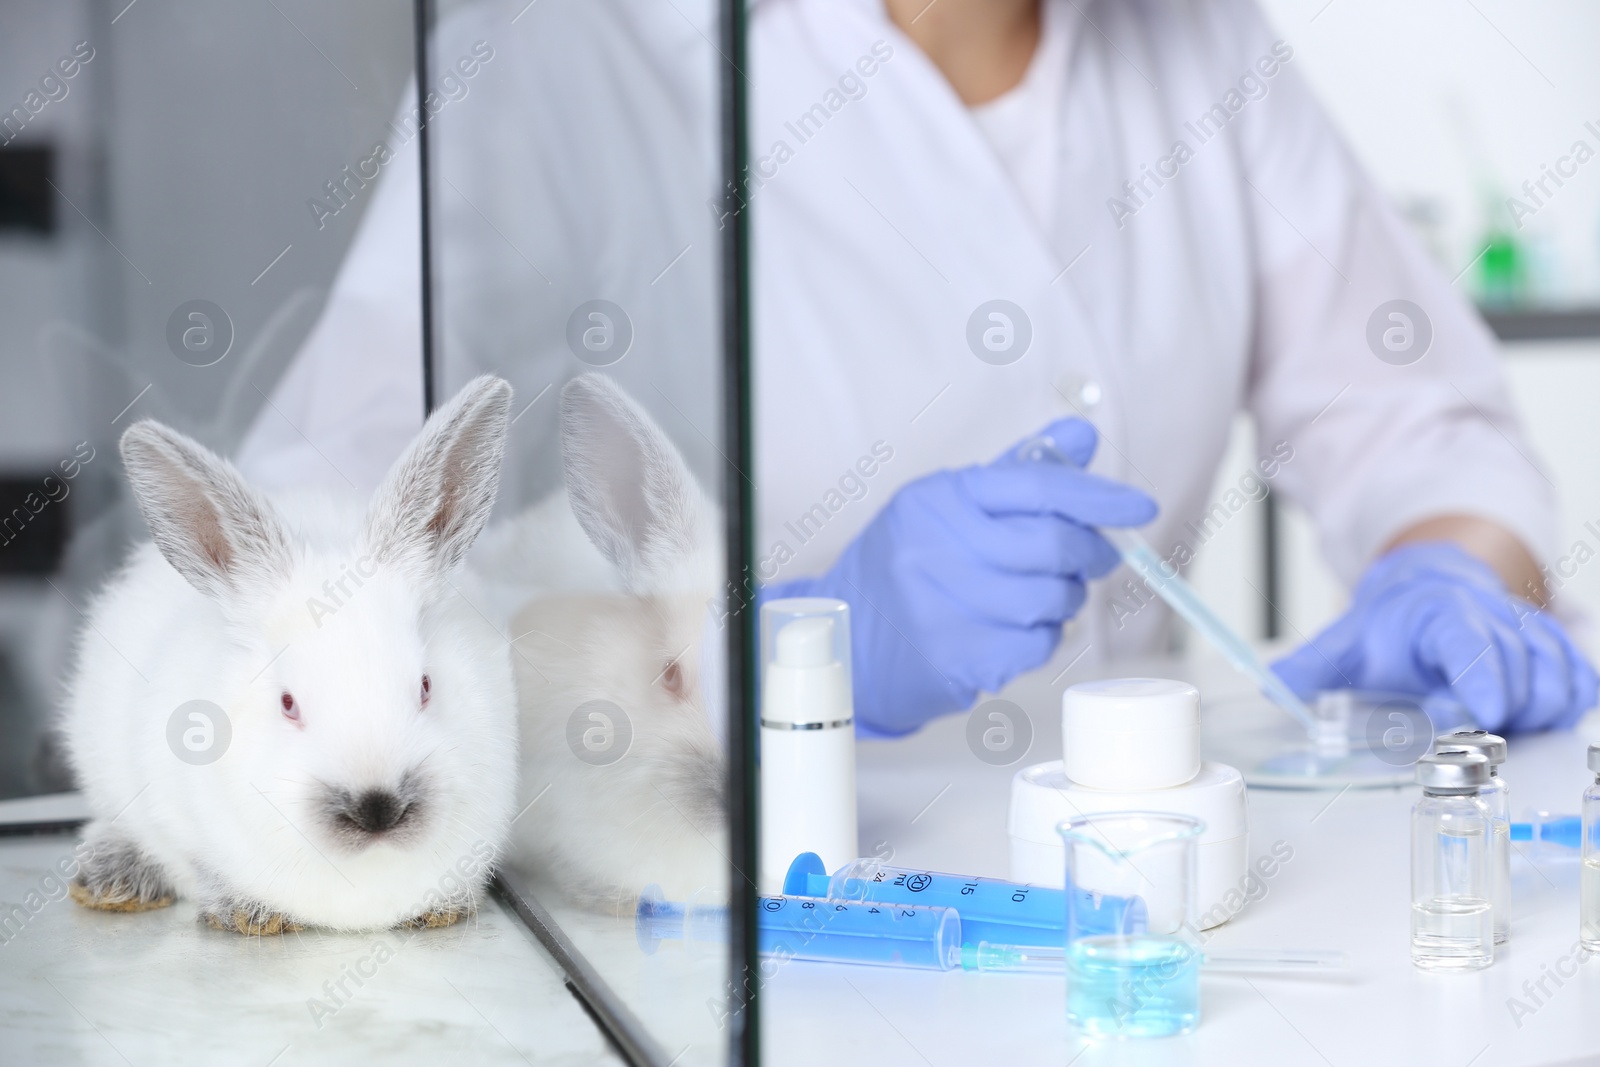 Photo of Rabbit in glass box on table and scientist working with microscope at chemical laboratory, closeup. Animal testing